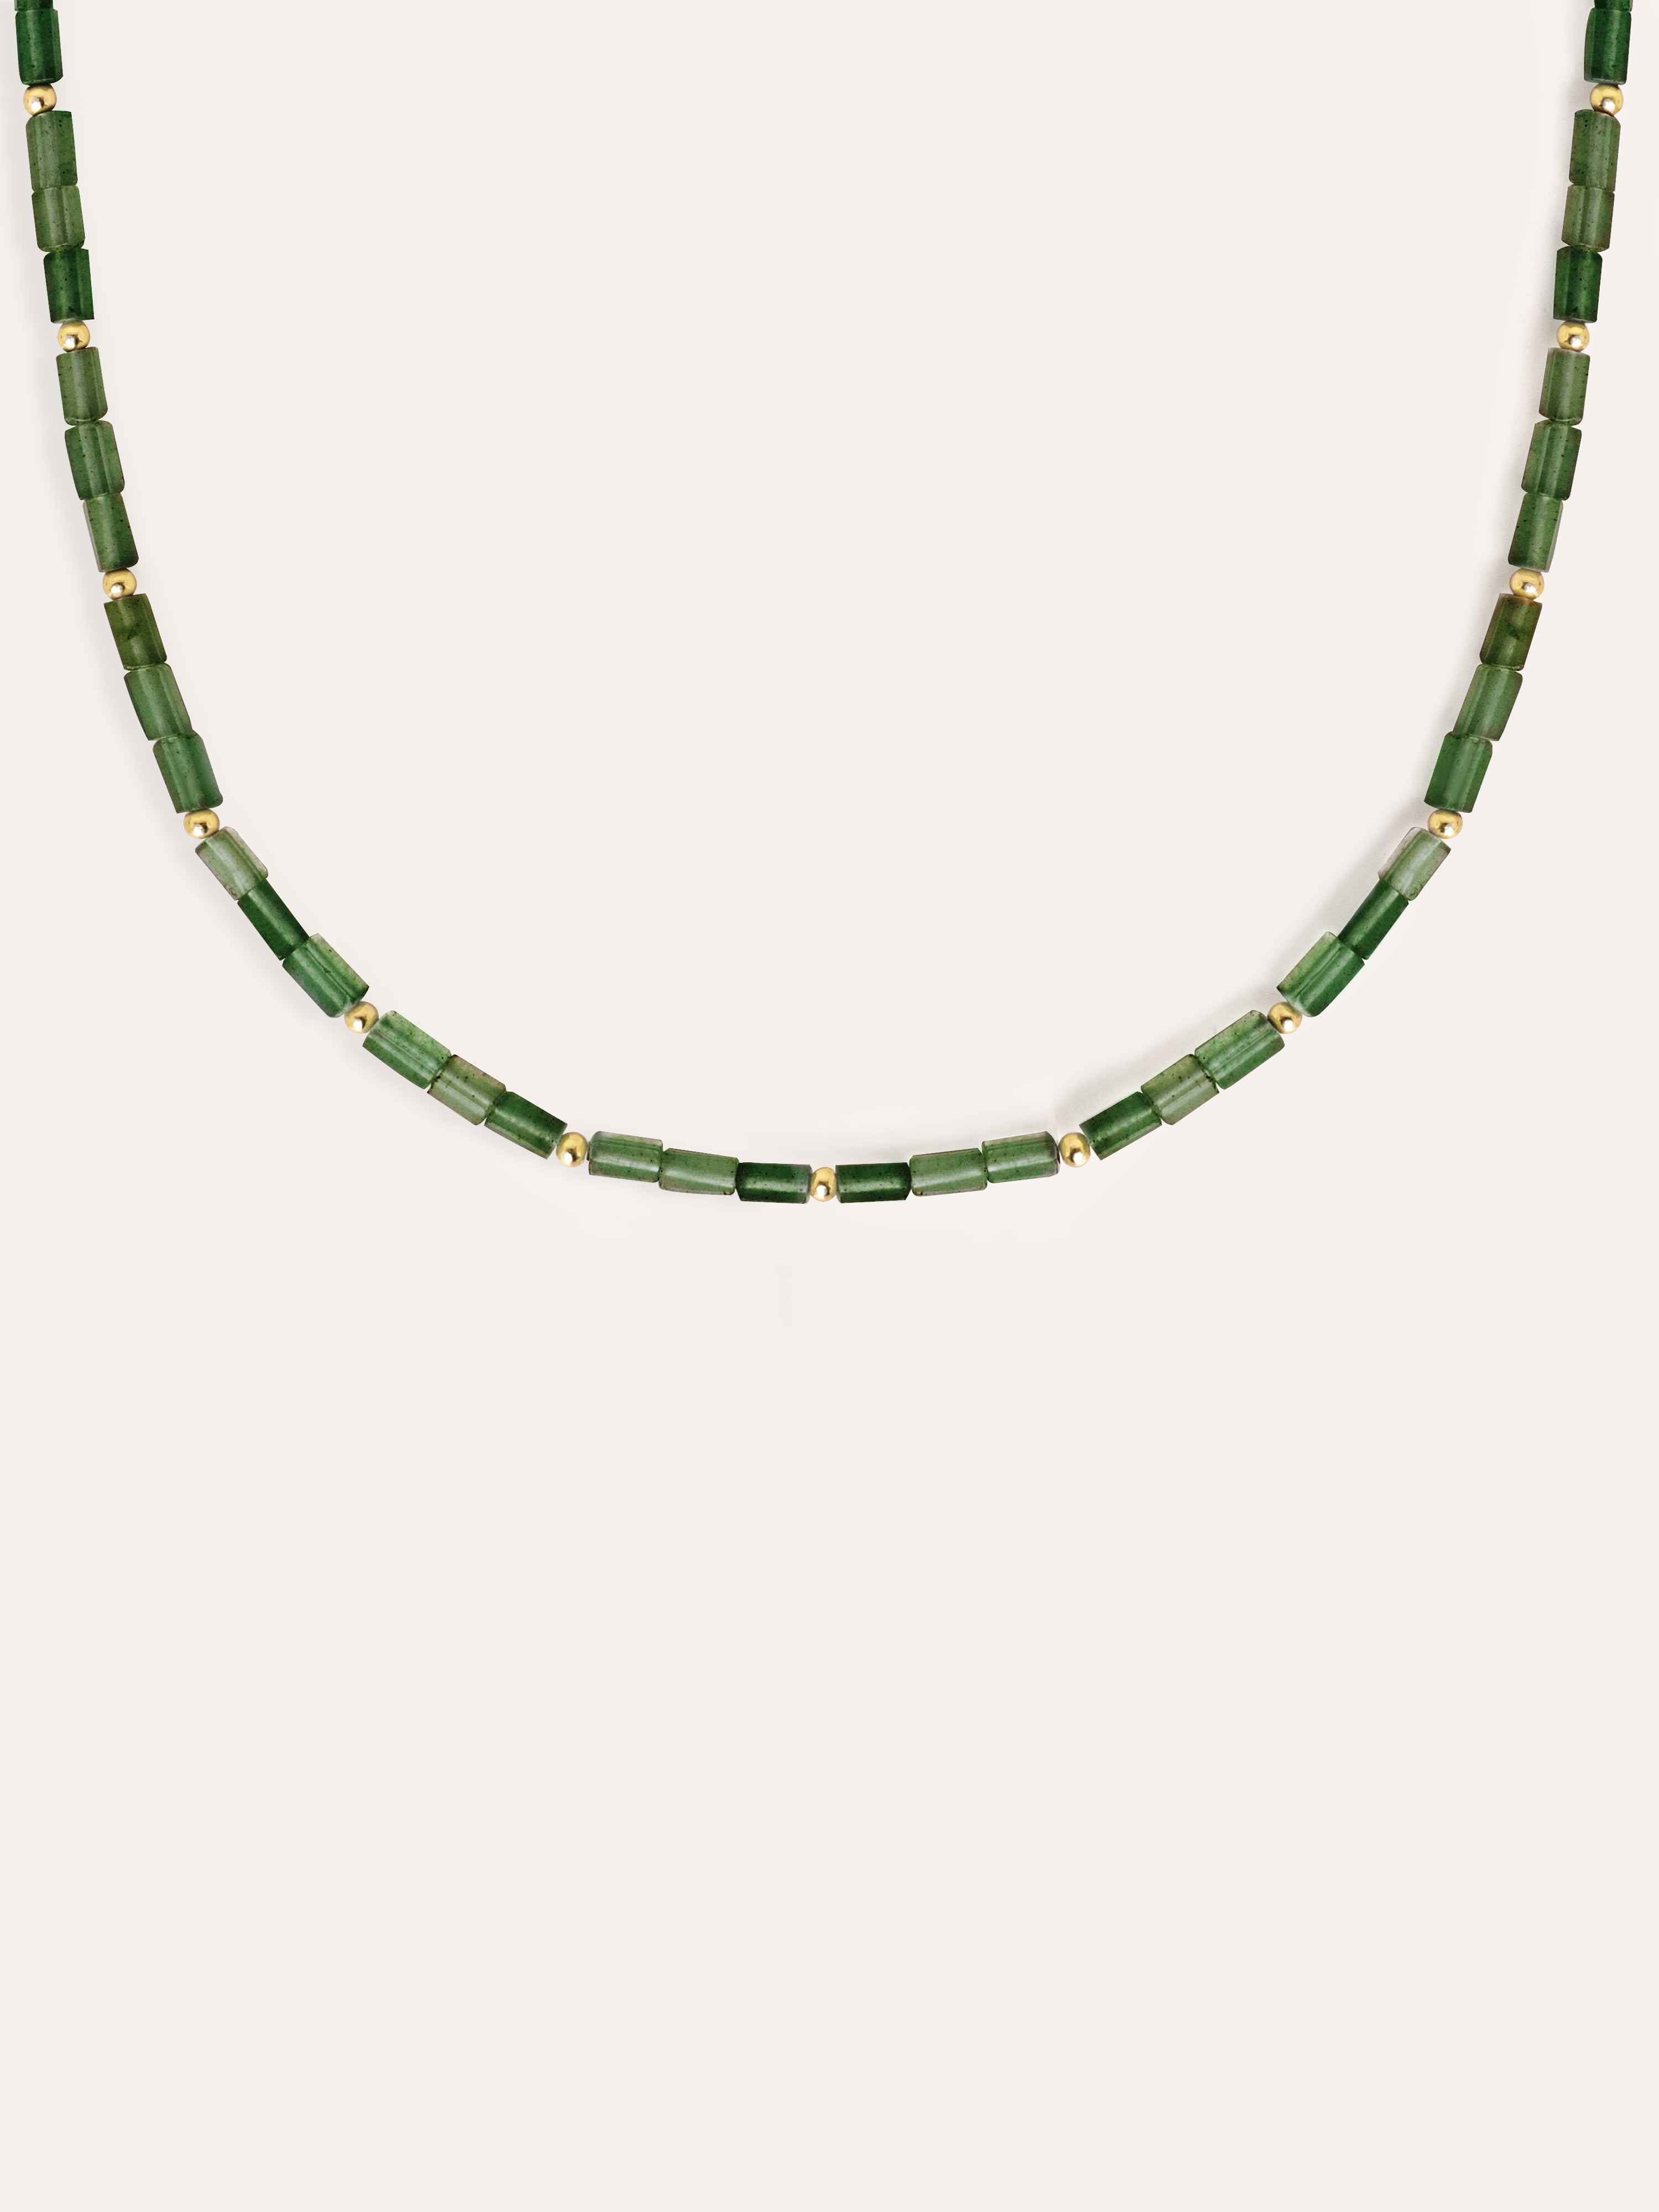 Cala Dots Green Gold Necklace 